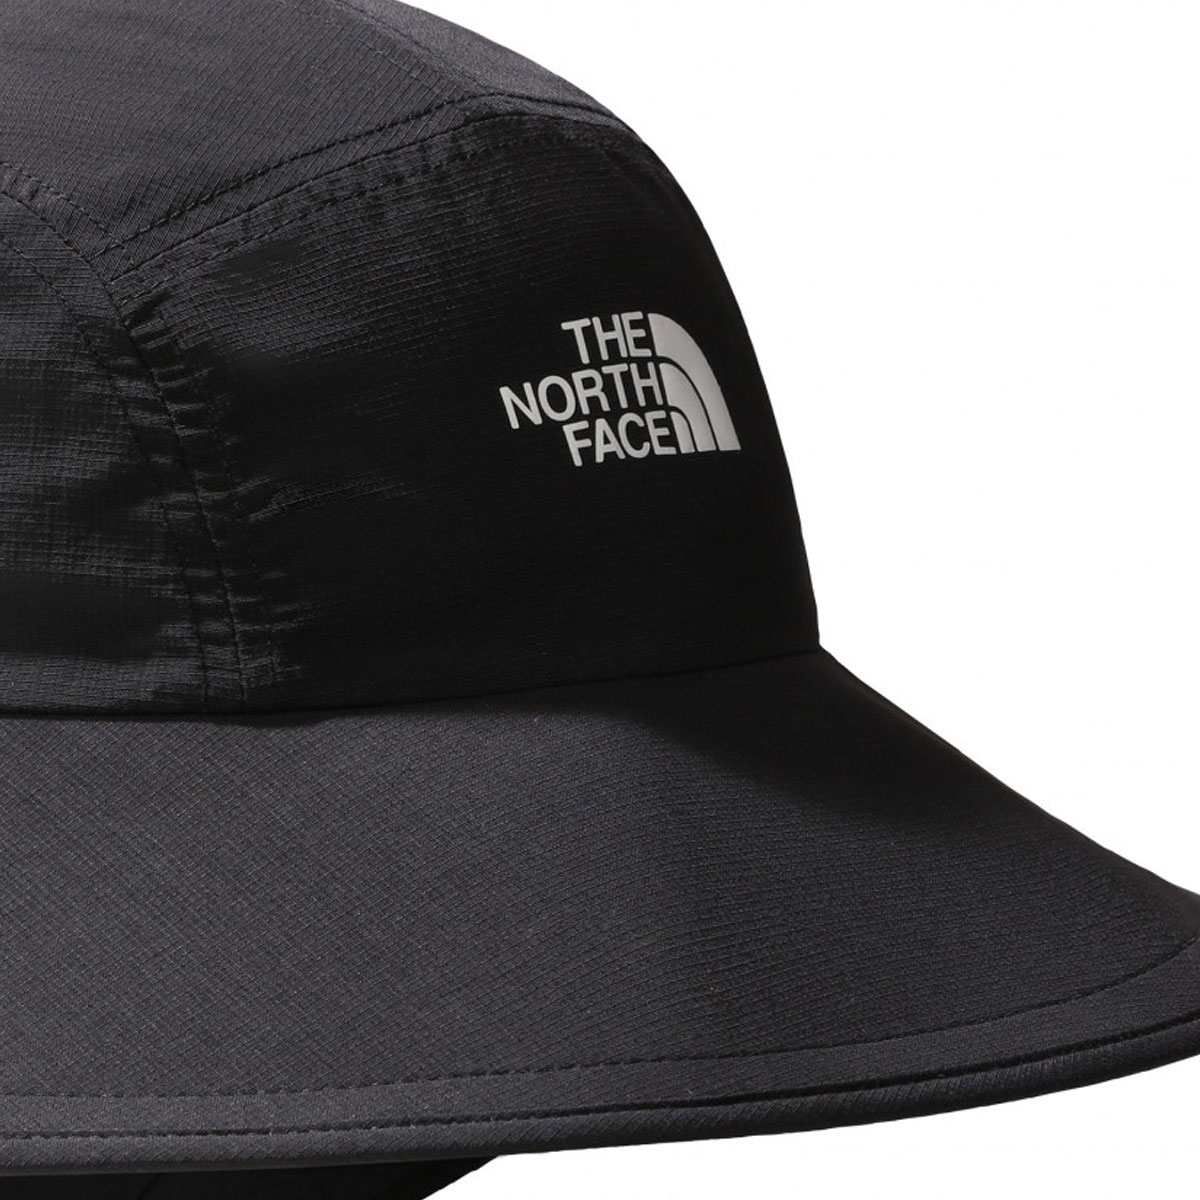 THE NORTH FACE - HORIZON MULLET BRIMMER